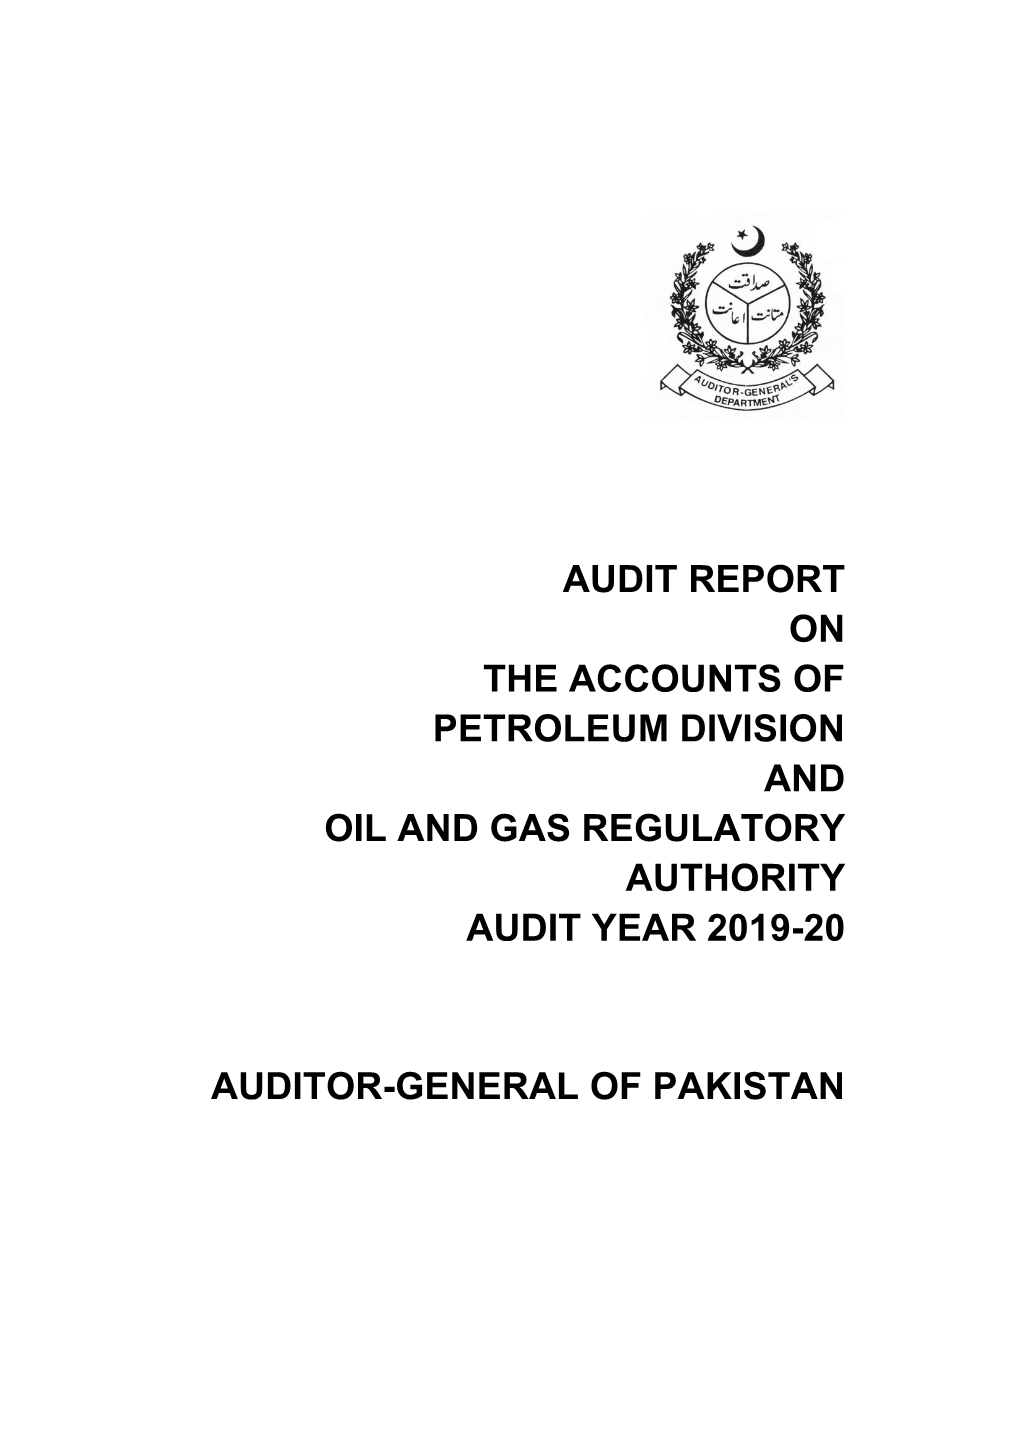 Audit Report on the Accounts of Petroleum Division and Oil and Gas Regulatory Authority Audit Year 2019-20